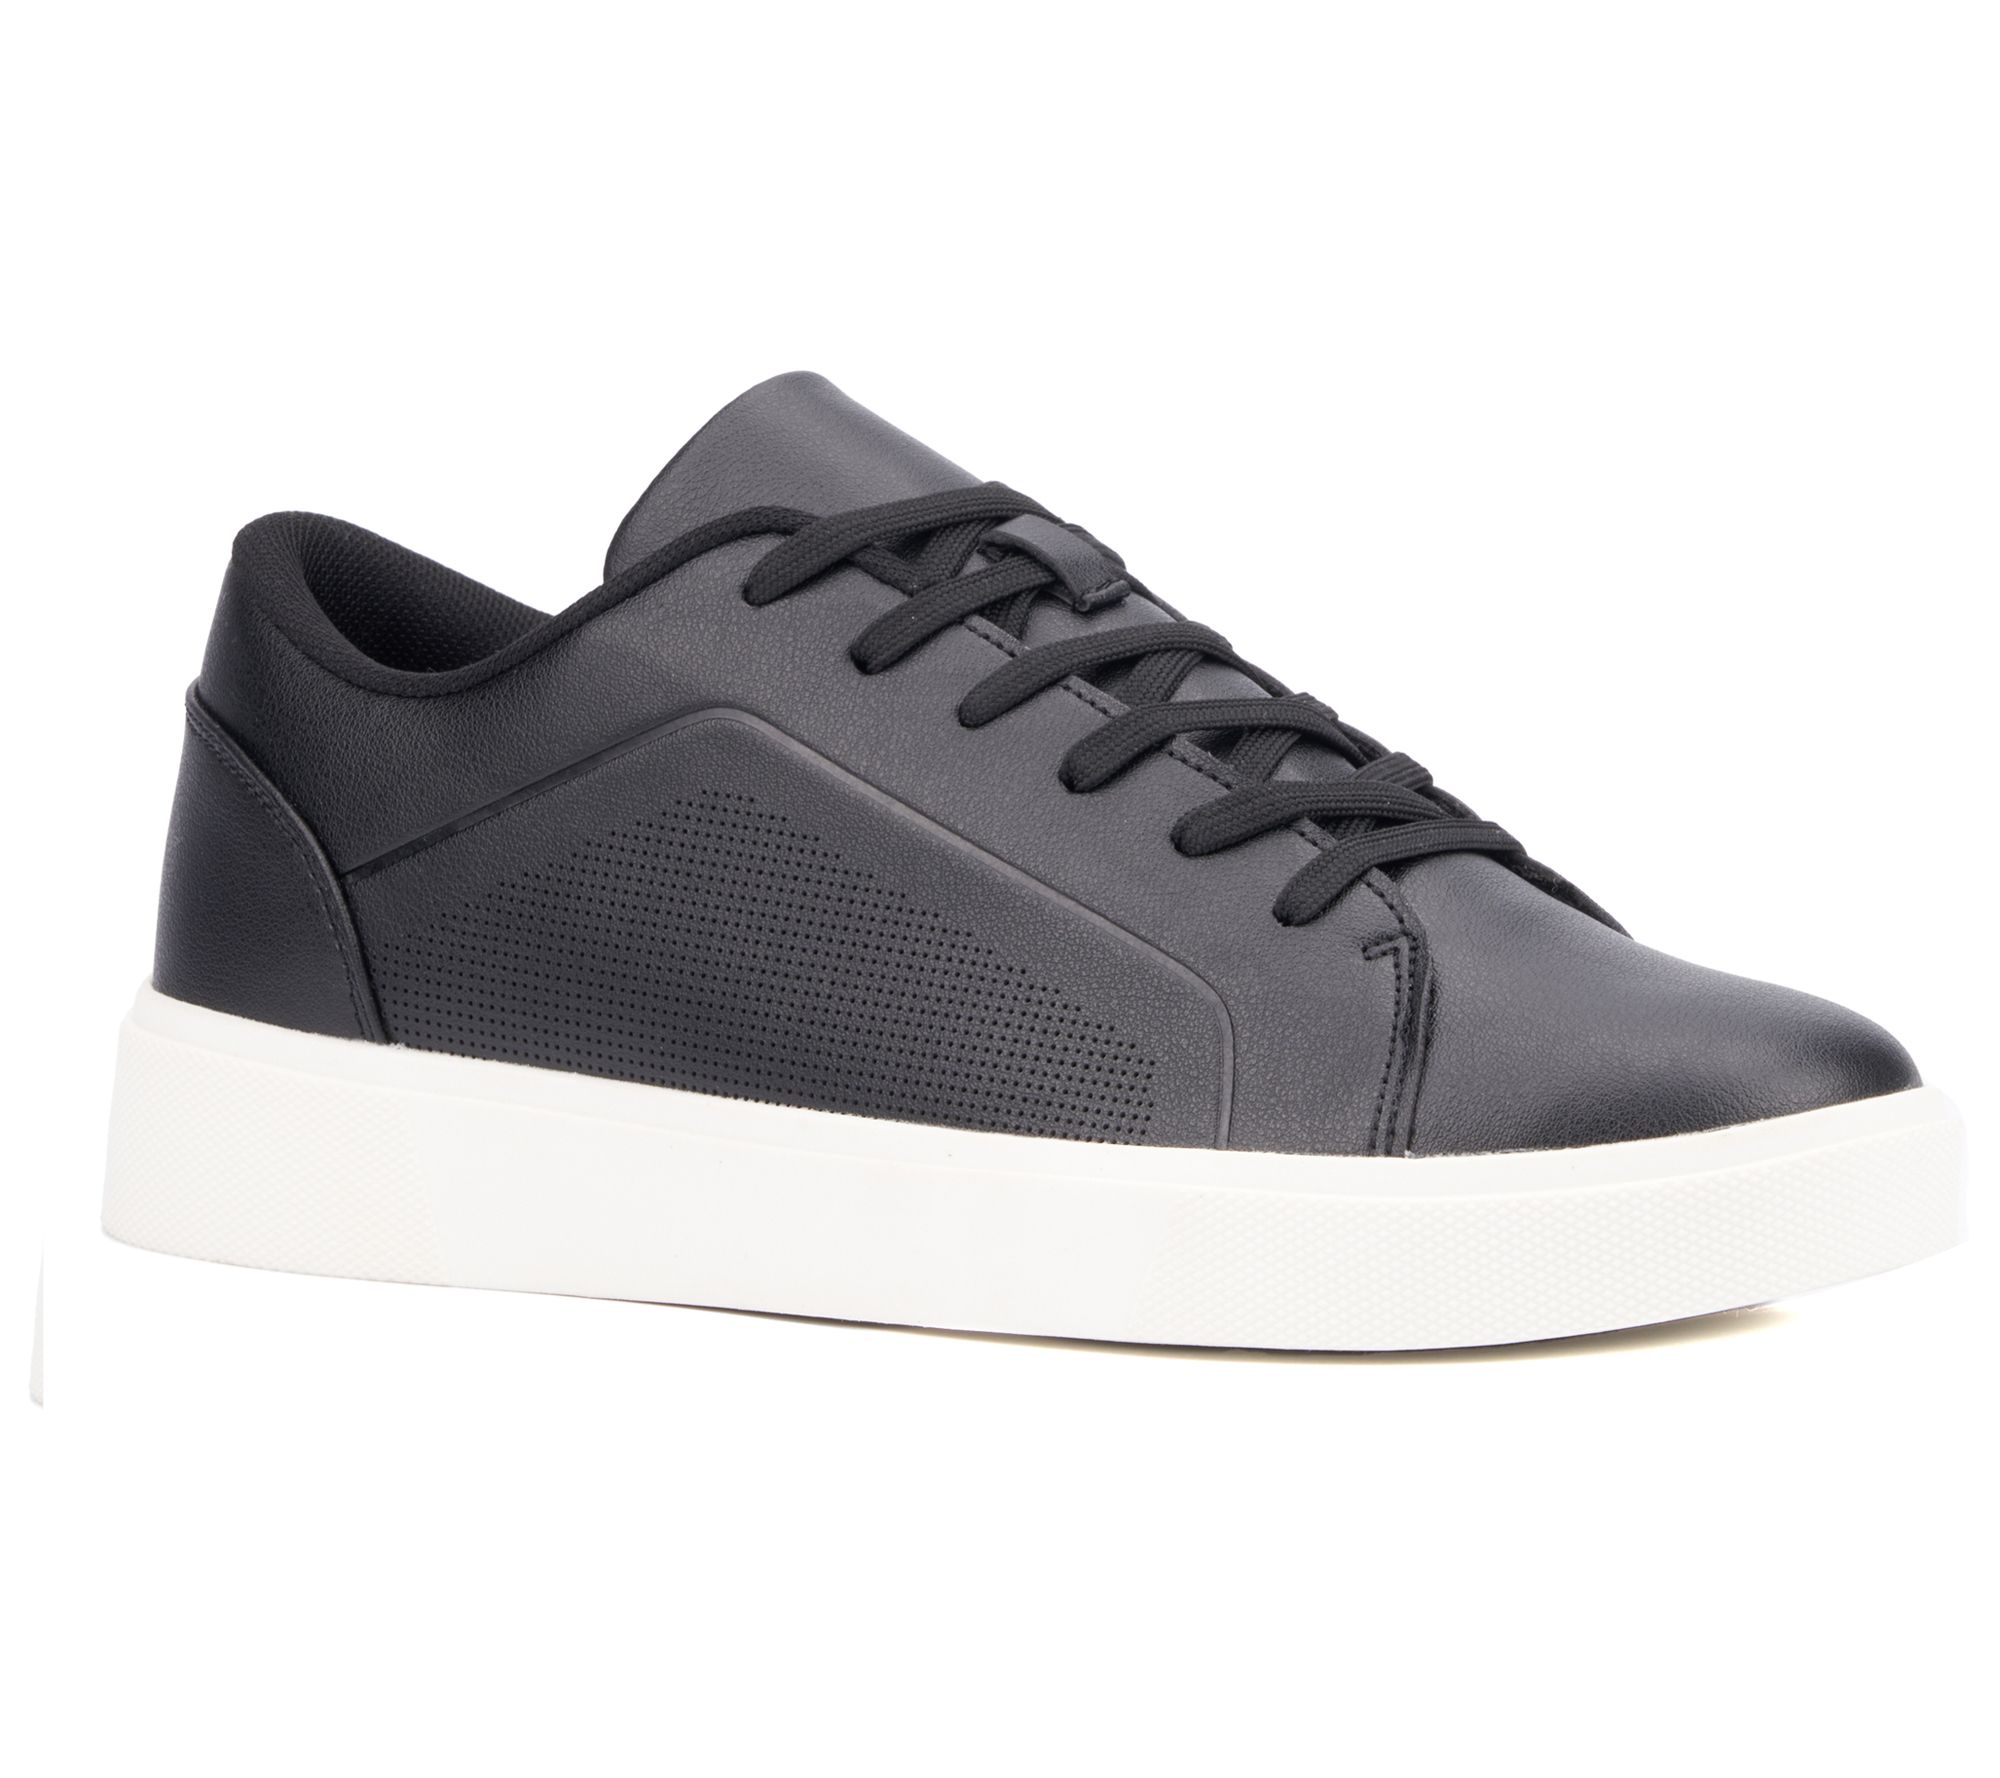 New York & Company - Men's Shoes 12 M - Sneakers & Athletic - QVC.com